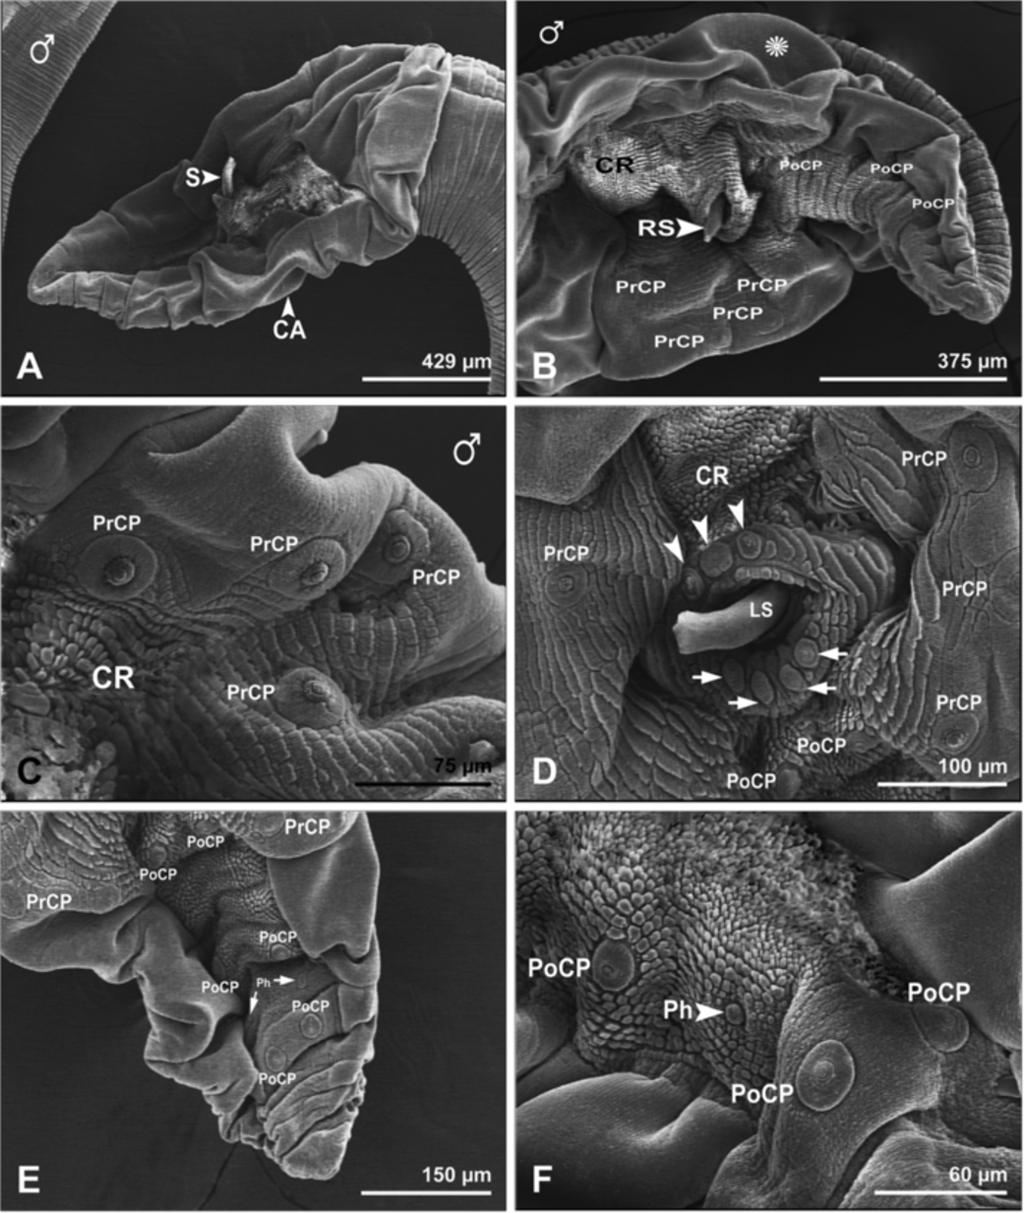 Gorgani et al. Parasites & Vectors 2013, 6:87 Page 6 of 8 Figure 4 Scanning electron micrographs showing posterior end of male Physaloptera clausa. A, caudal alae (CA), and spicule (S). Bar= 429 μm.